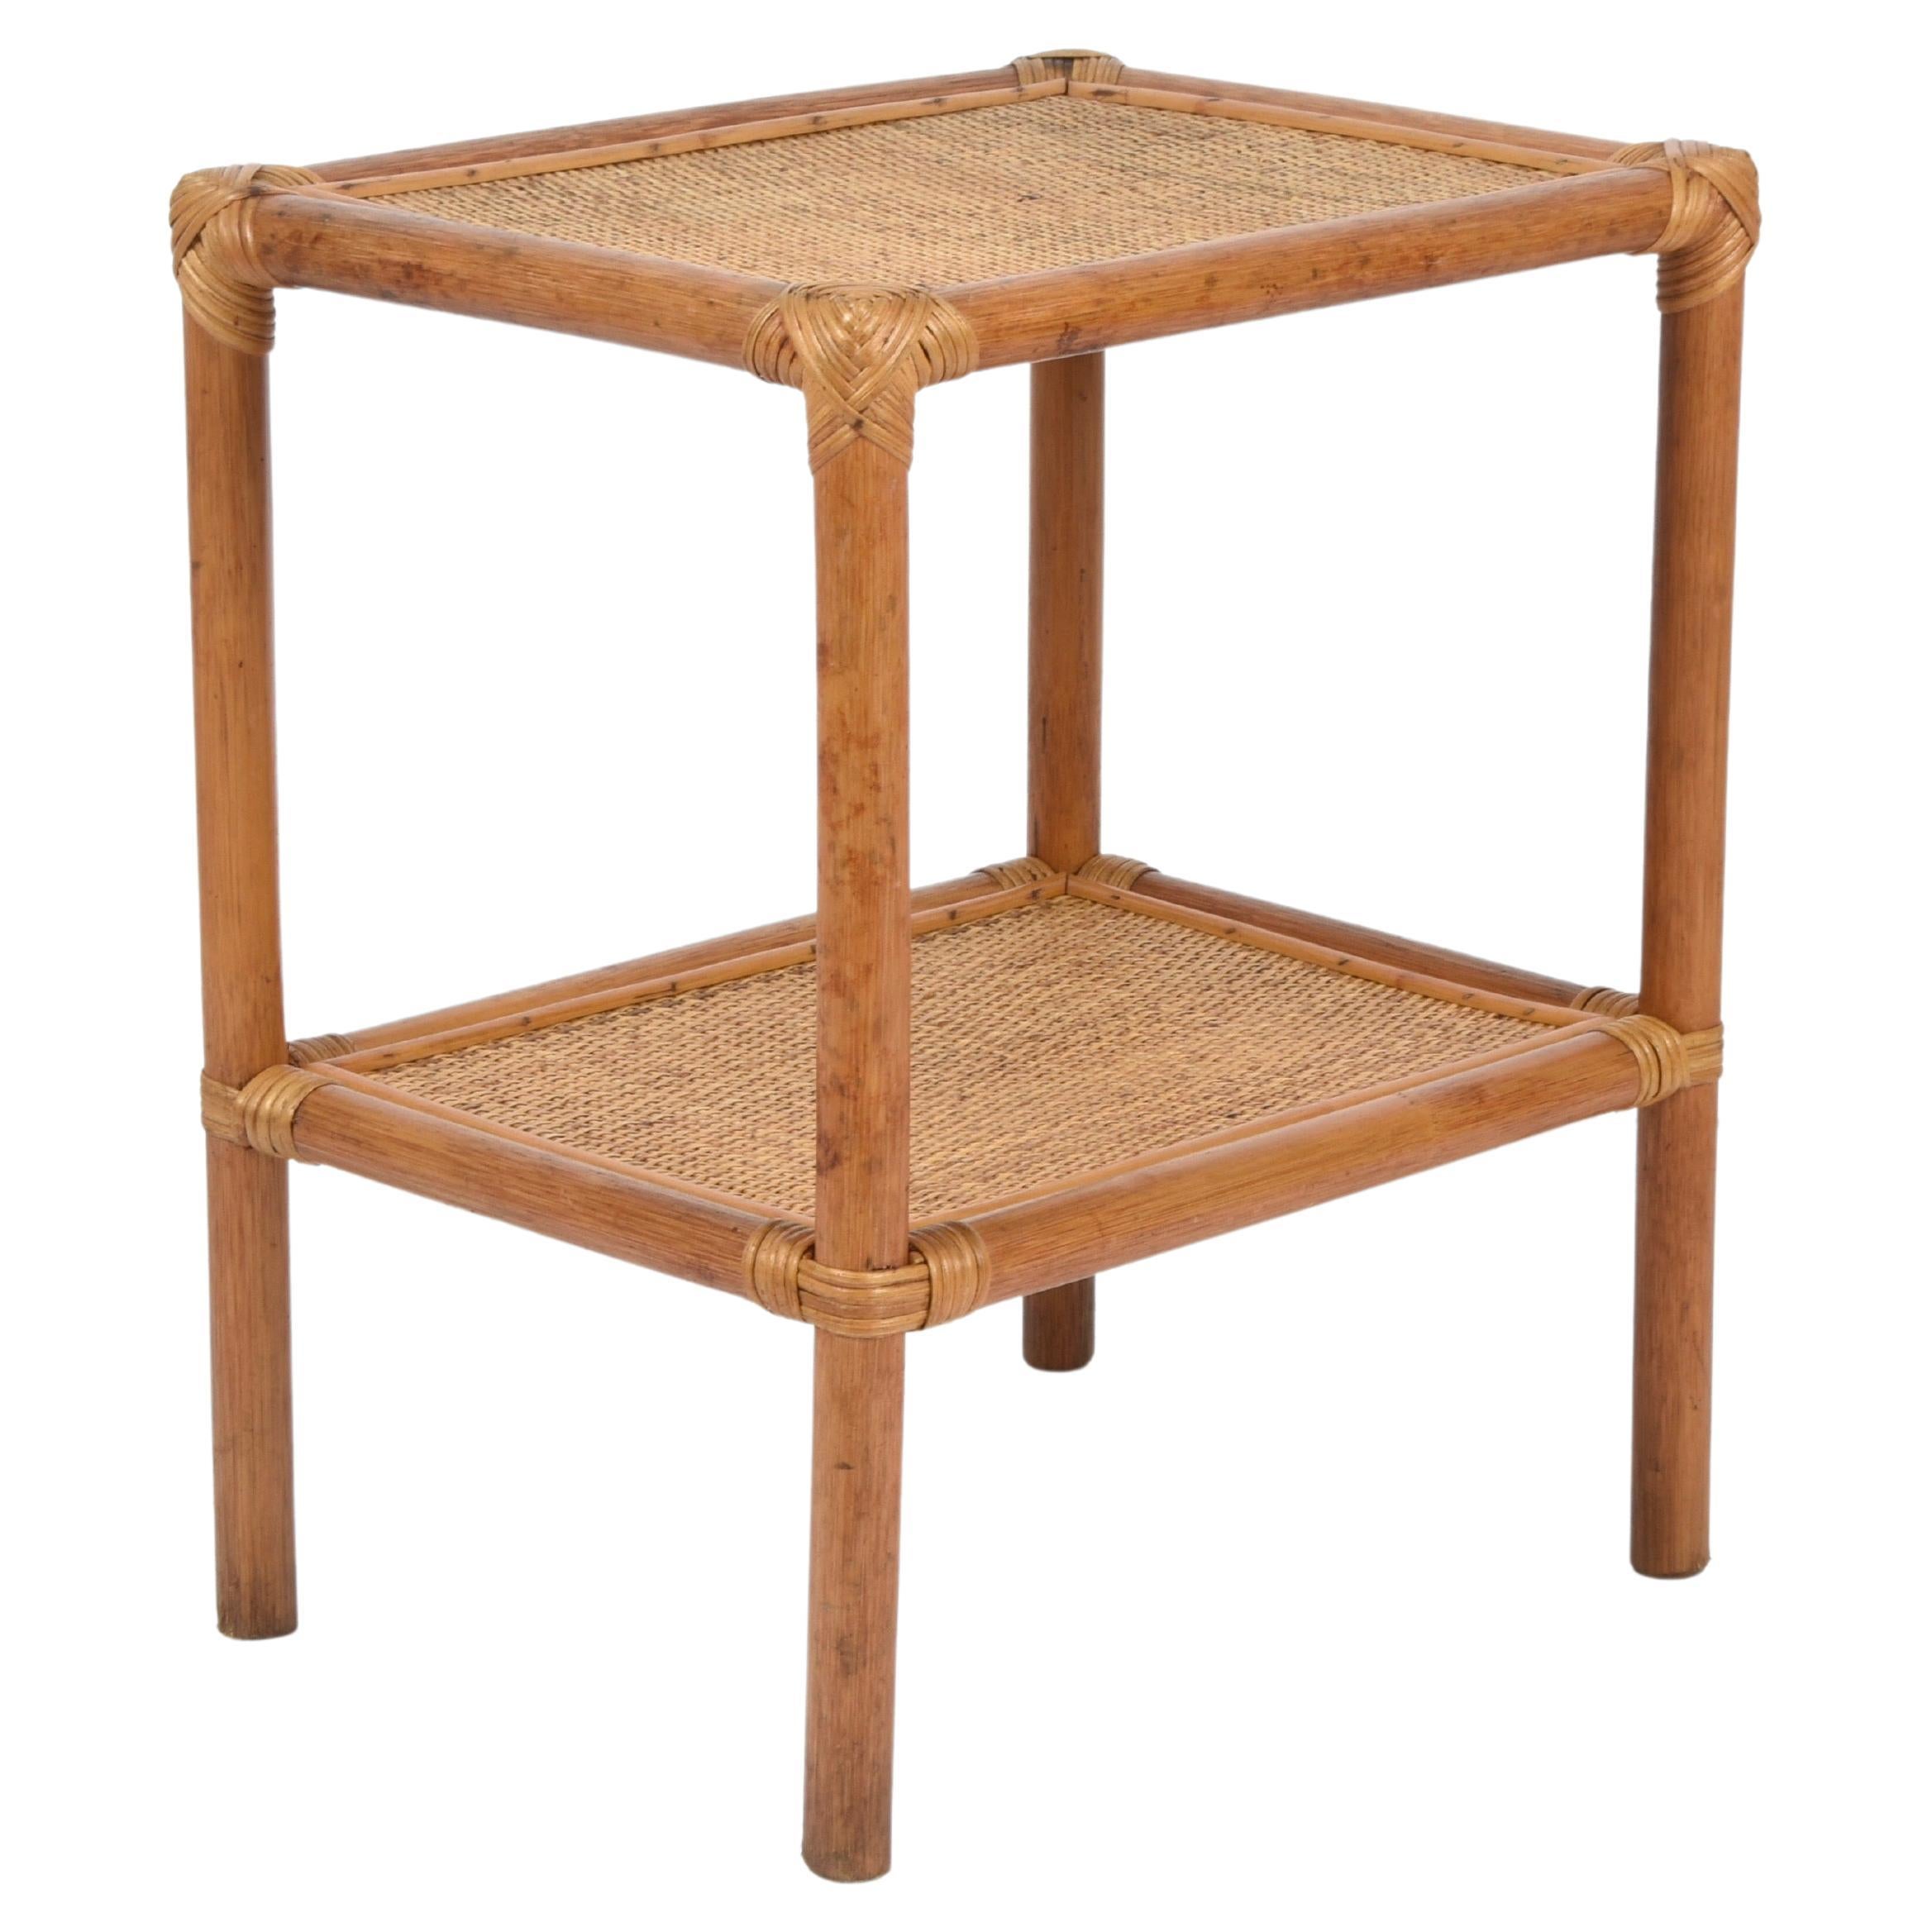 Mid-Century Rectangular Two-Tiers Bamboo and Rattan Italian Side Table, 1970s For Sale